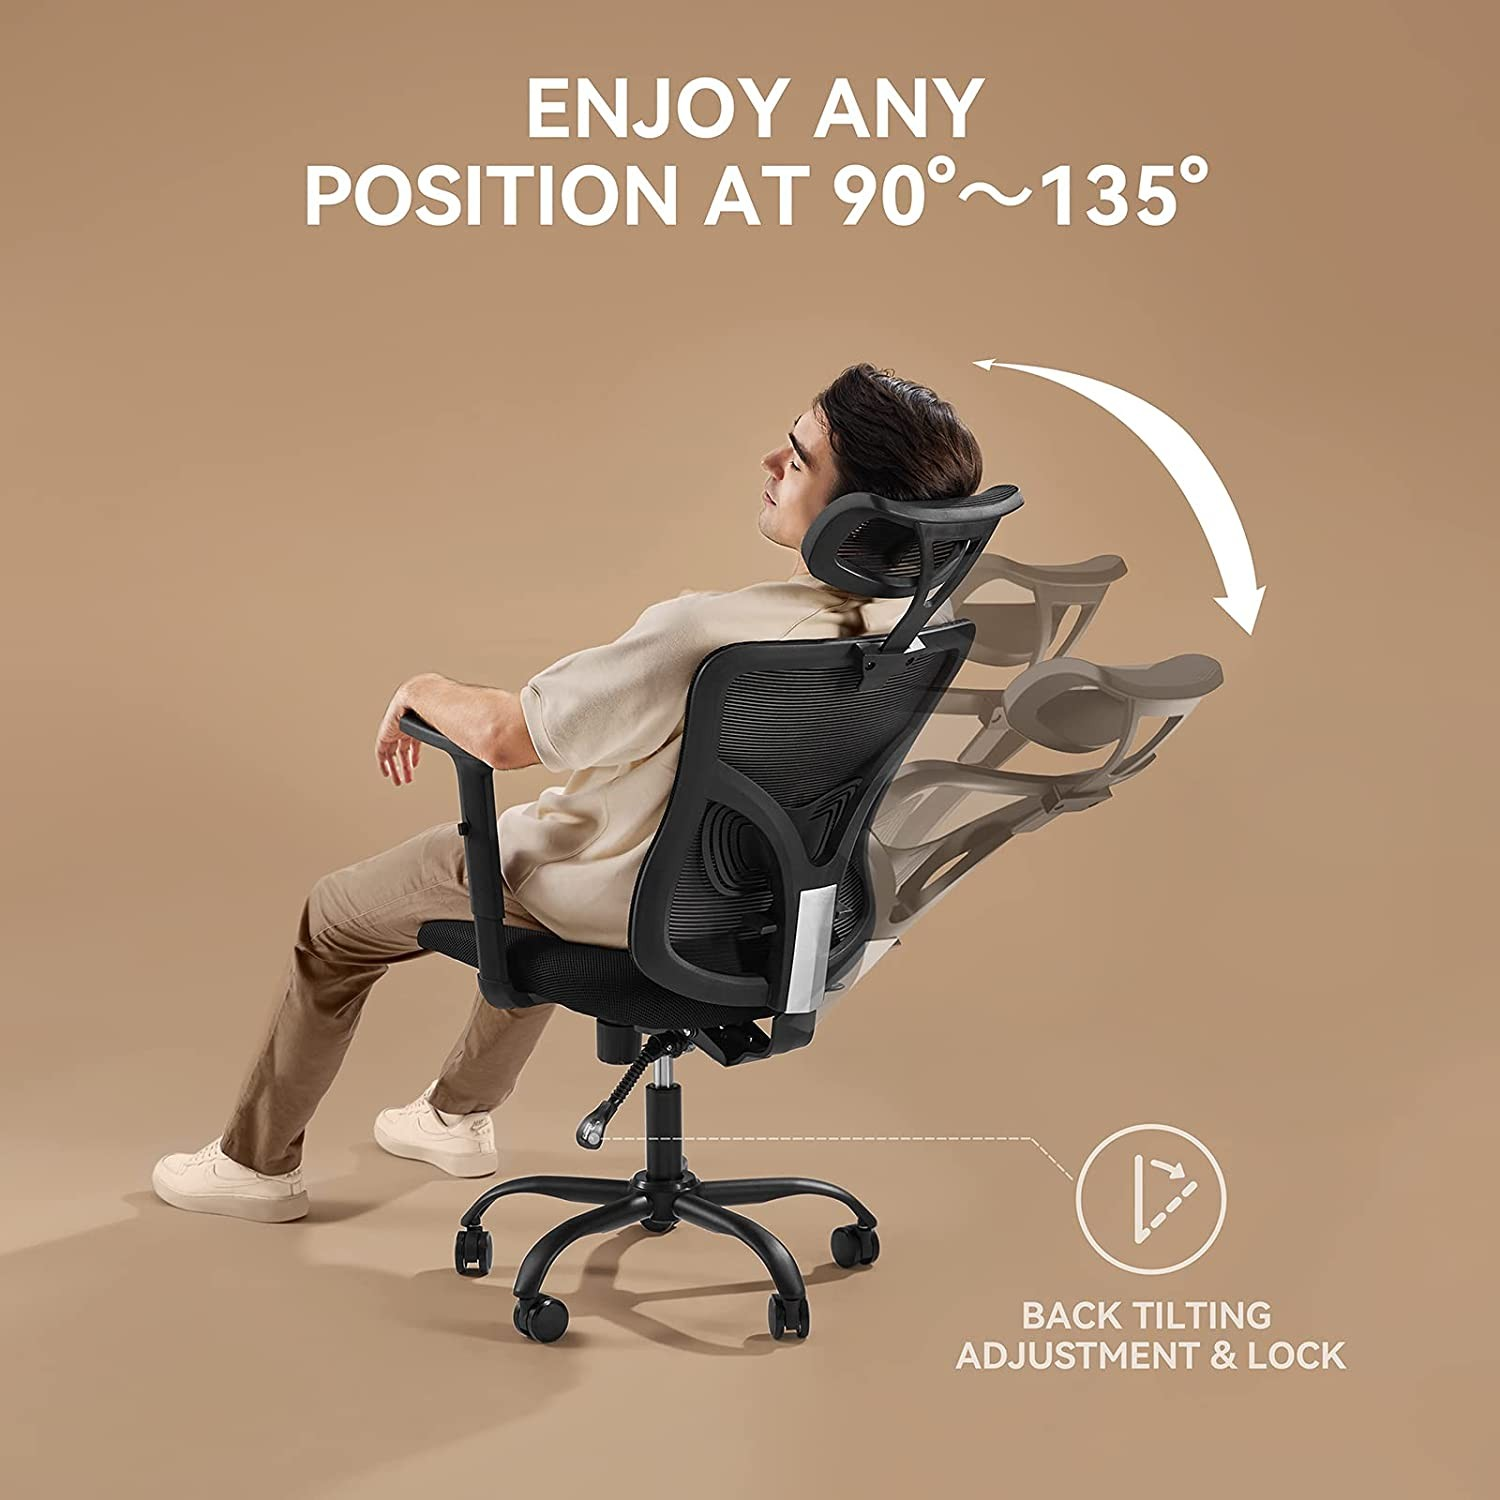 Did Ergonomic Chairs Really Solve the Problem of Sedentary?